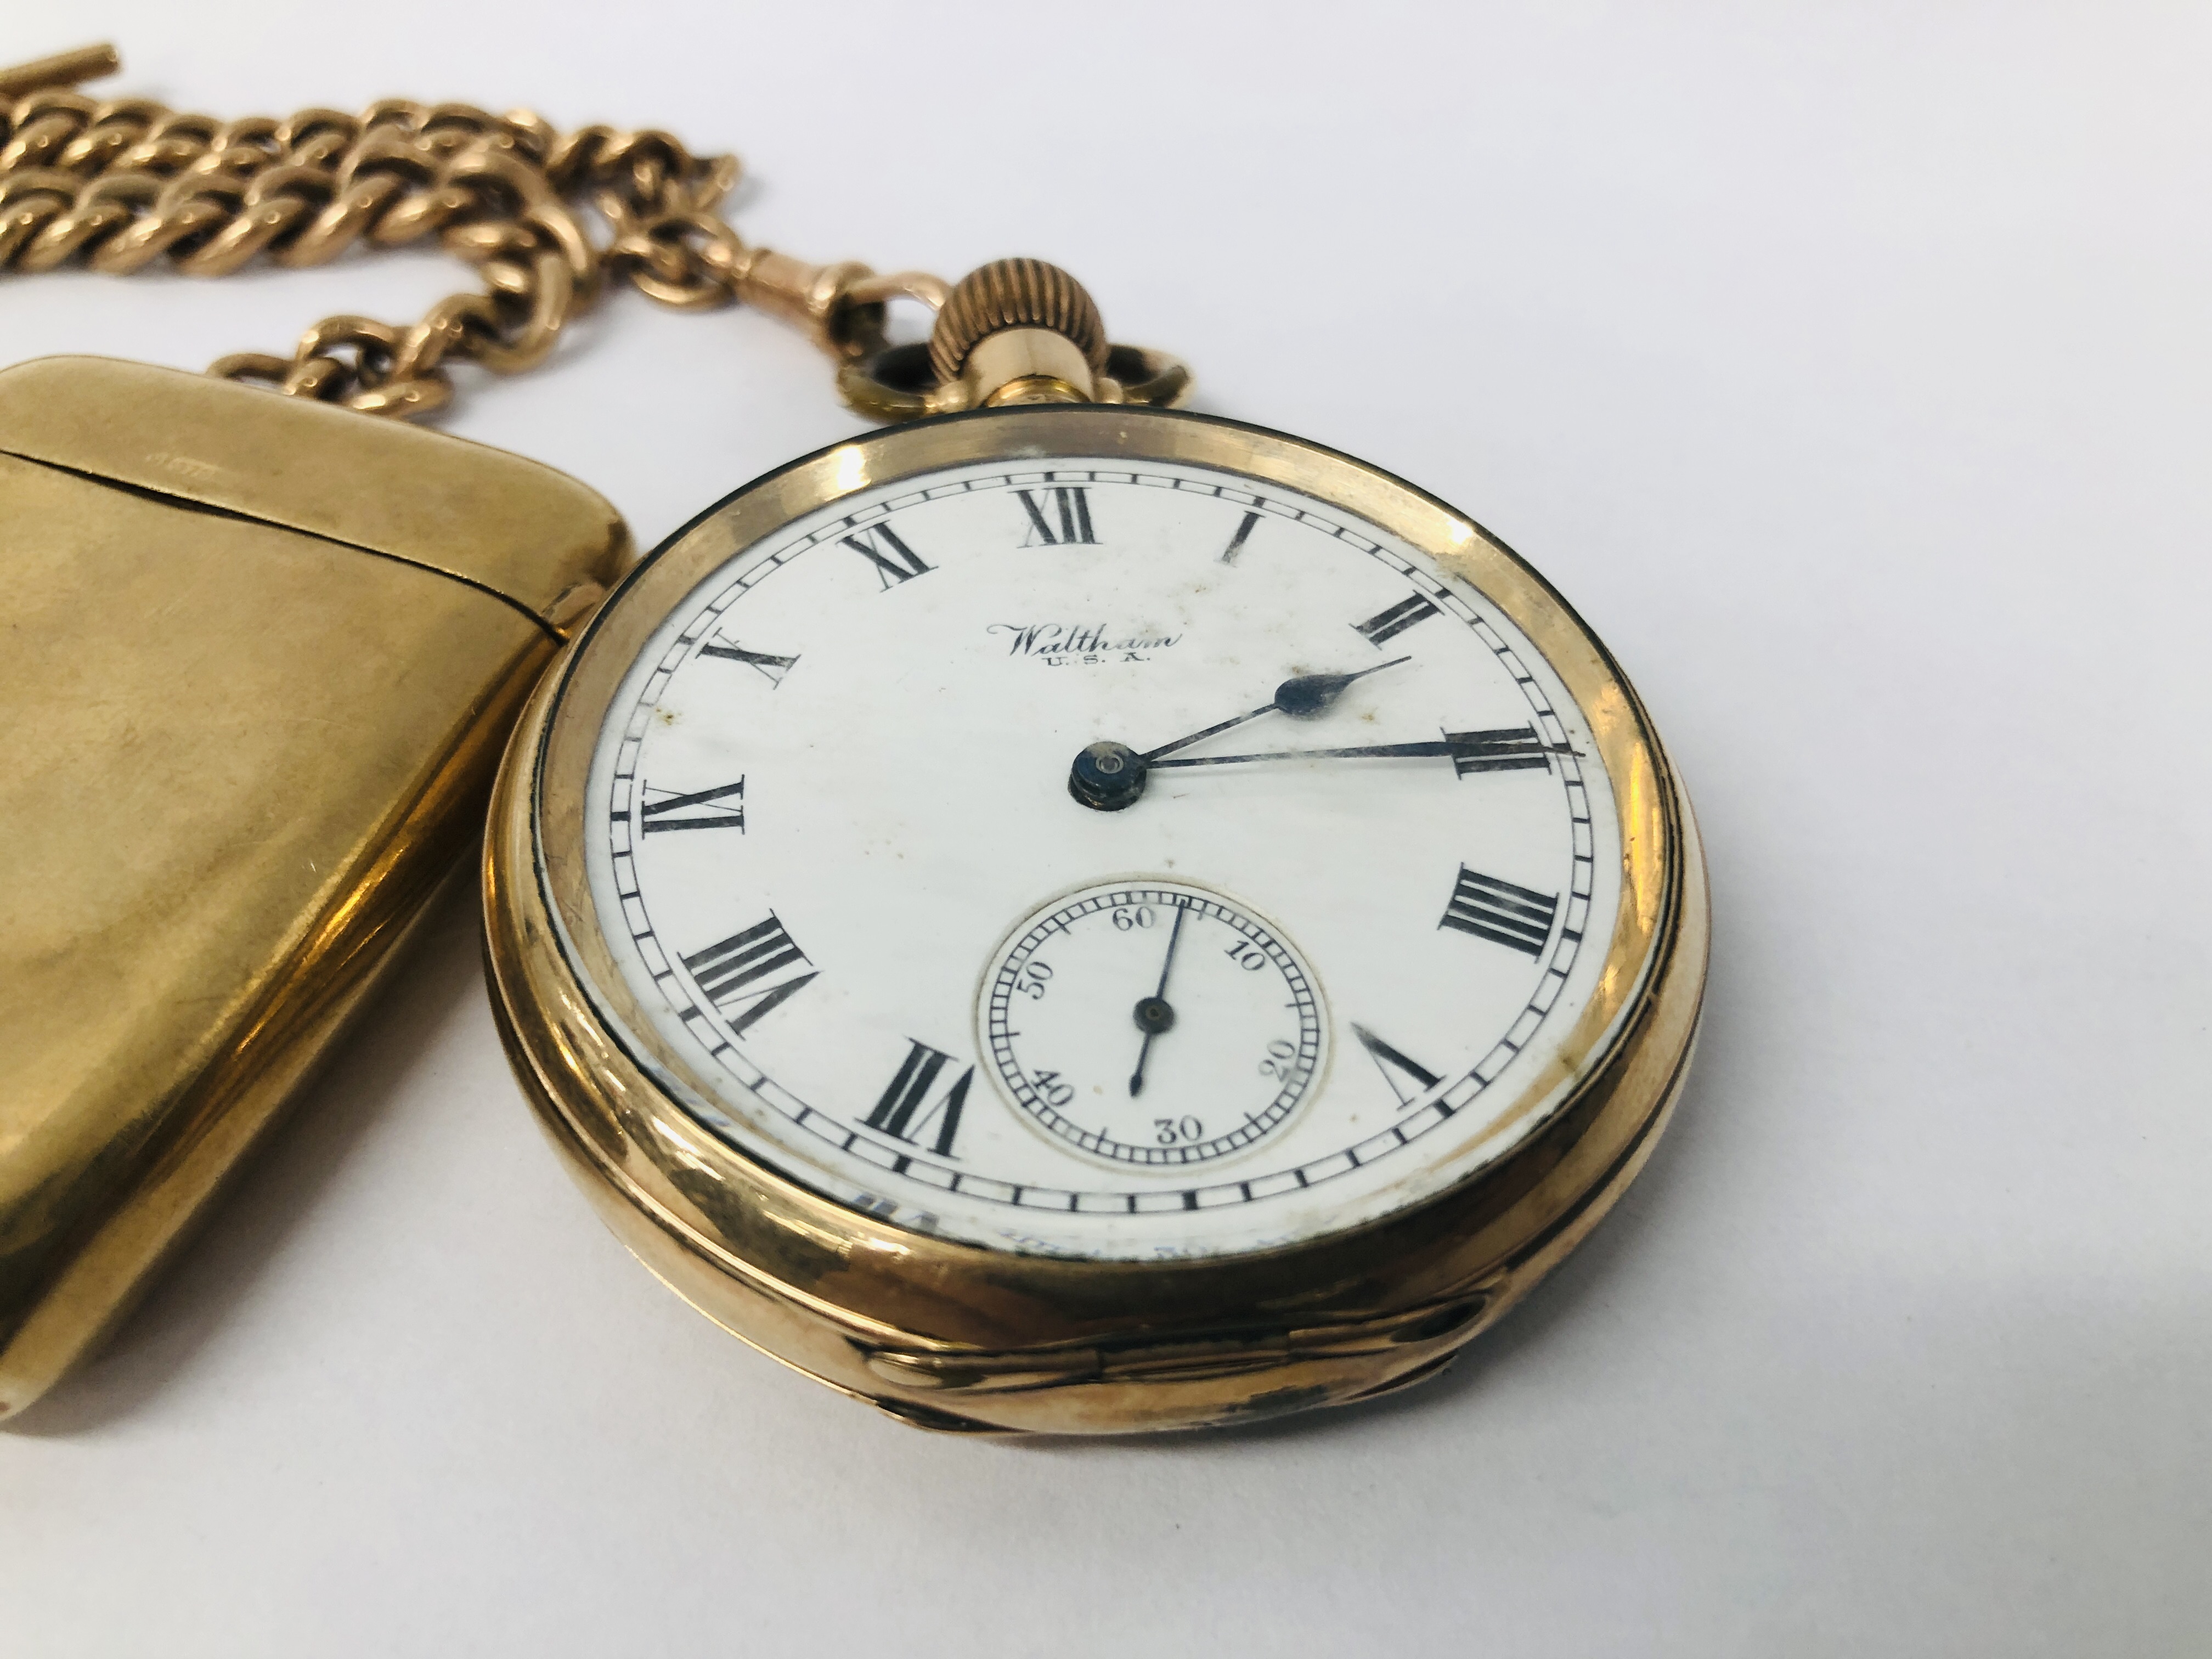 A WALTHAM GOLD PLATED POCKET WATCH ON 9CT GOLD WATCH CHAIN WITH A GEORGE V 1913 FULL SOVEREIGN COIN - Image 6 of 19